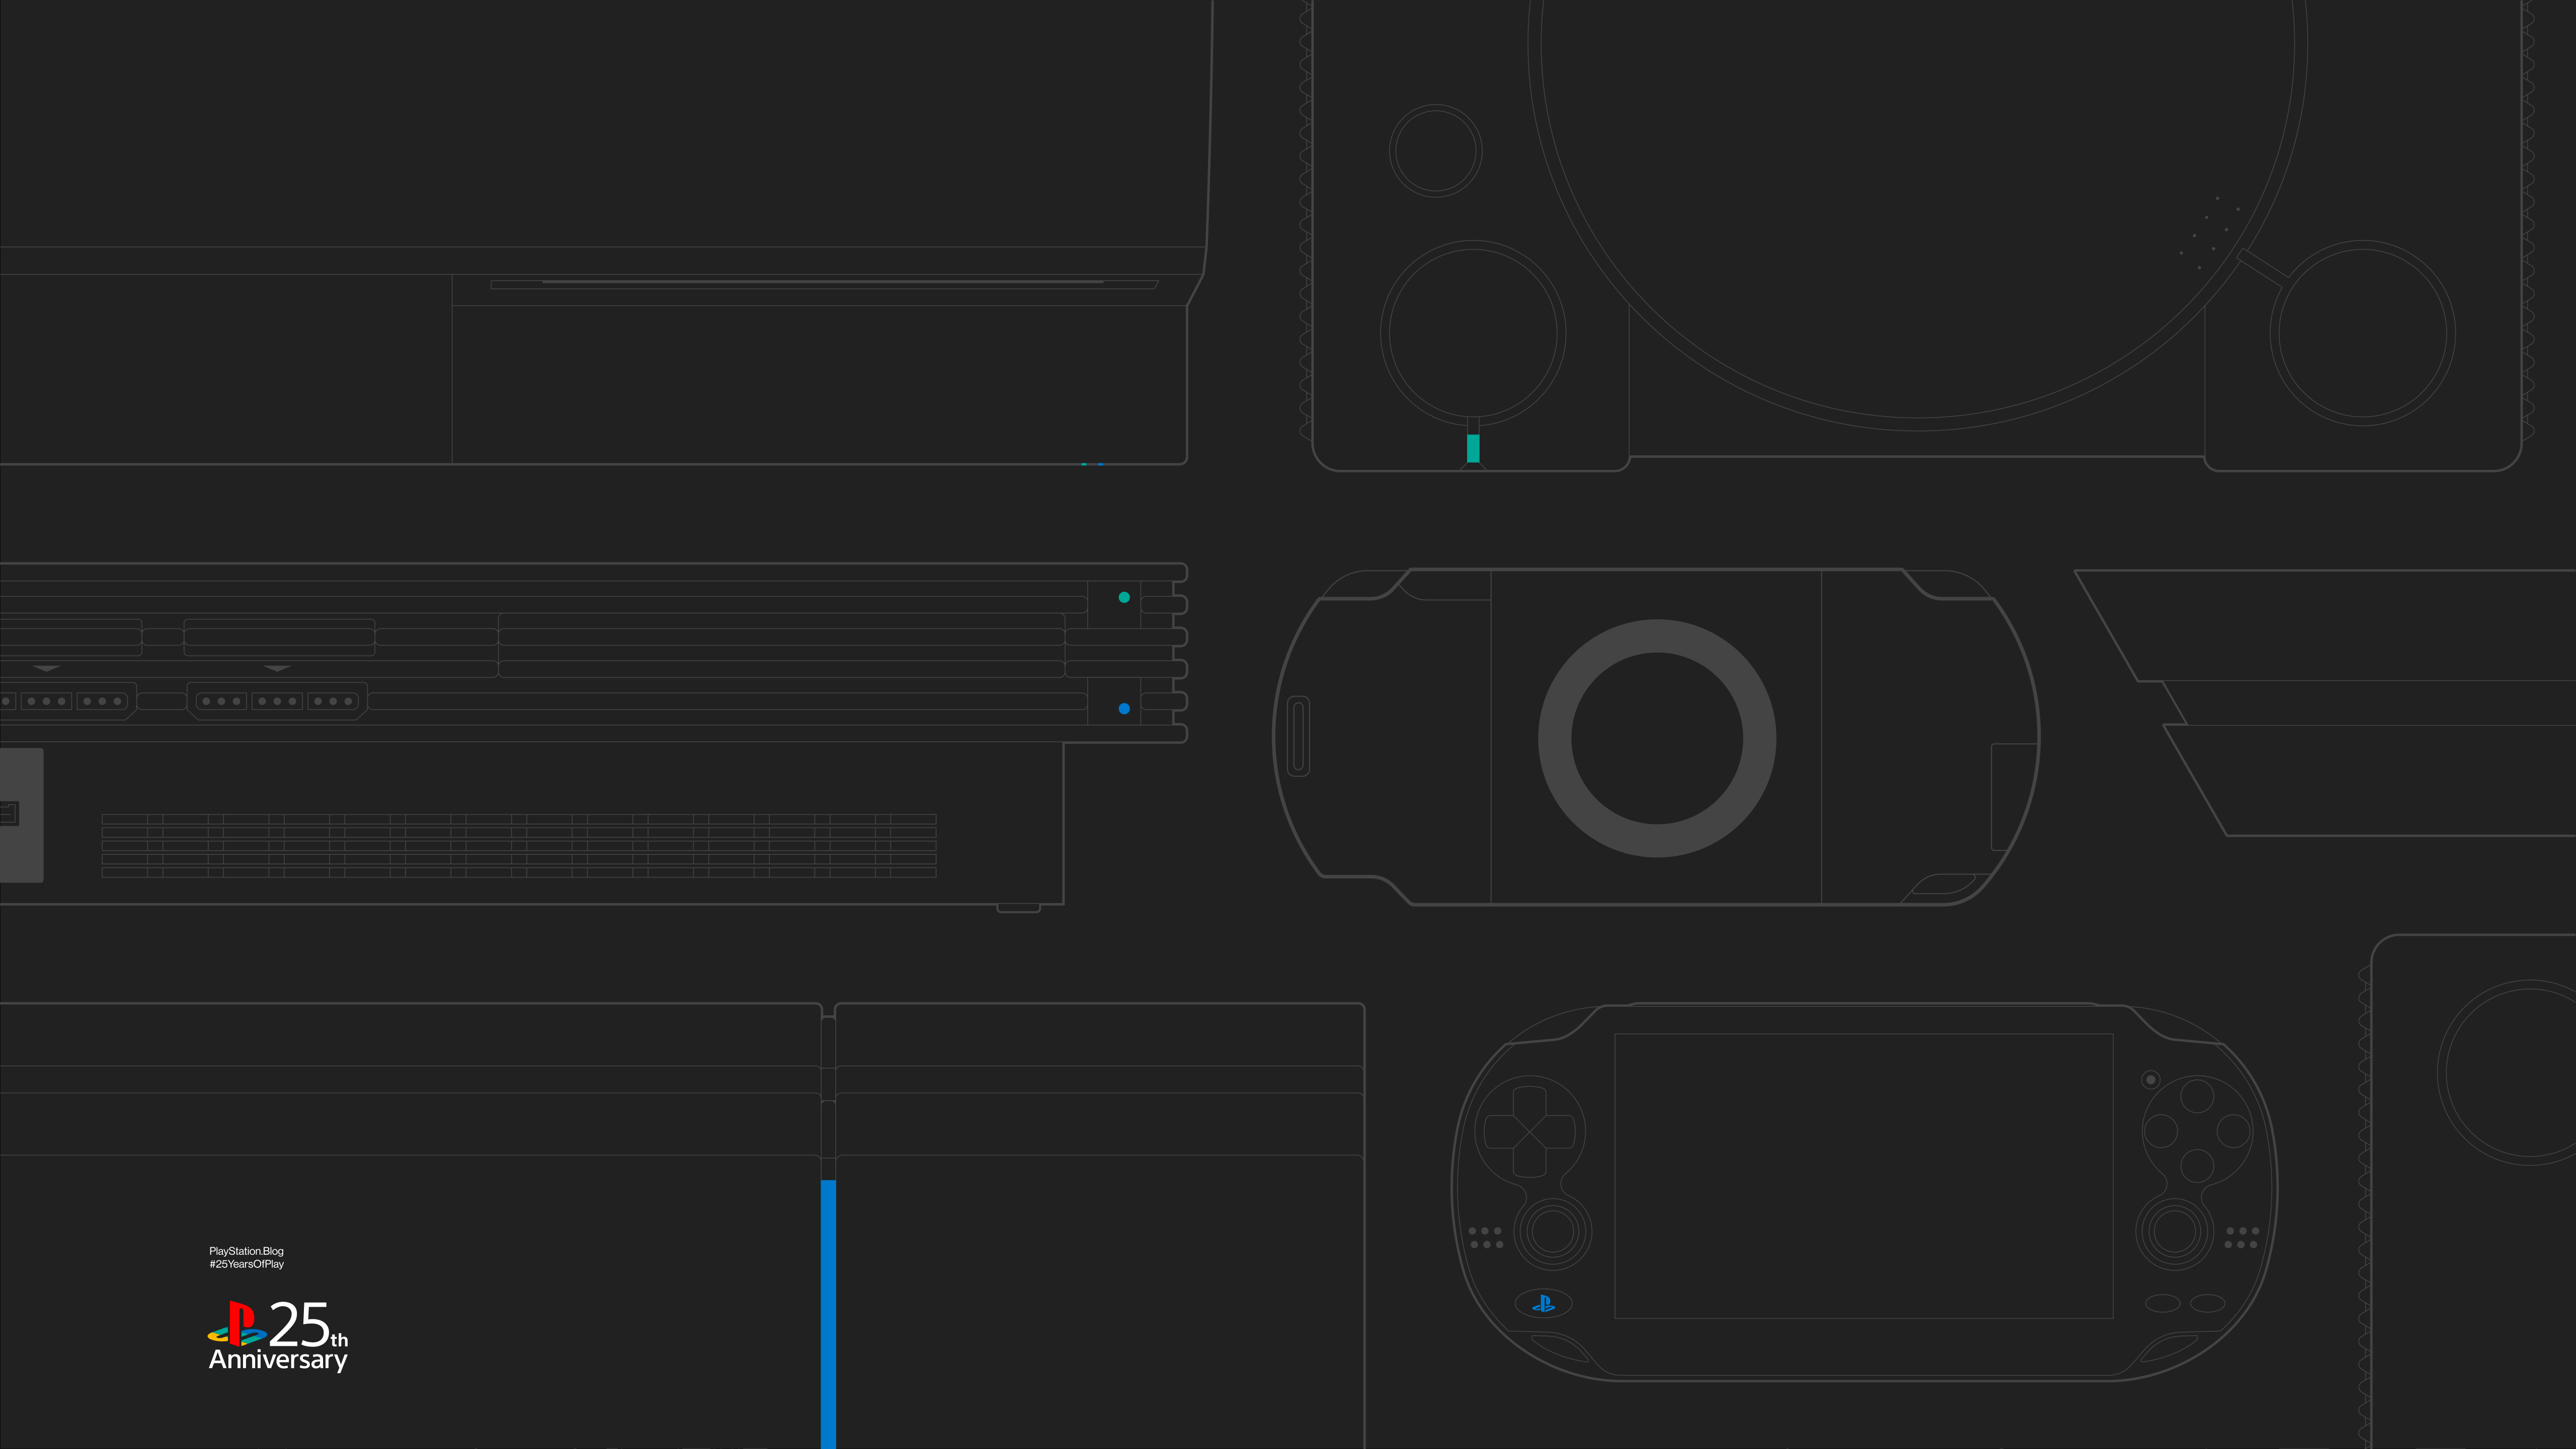 Celebrate PlayStation's Anniversary With 8 New Custom Made Wallpaper